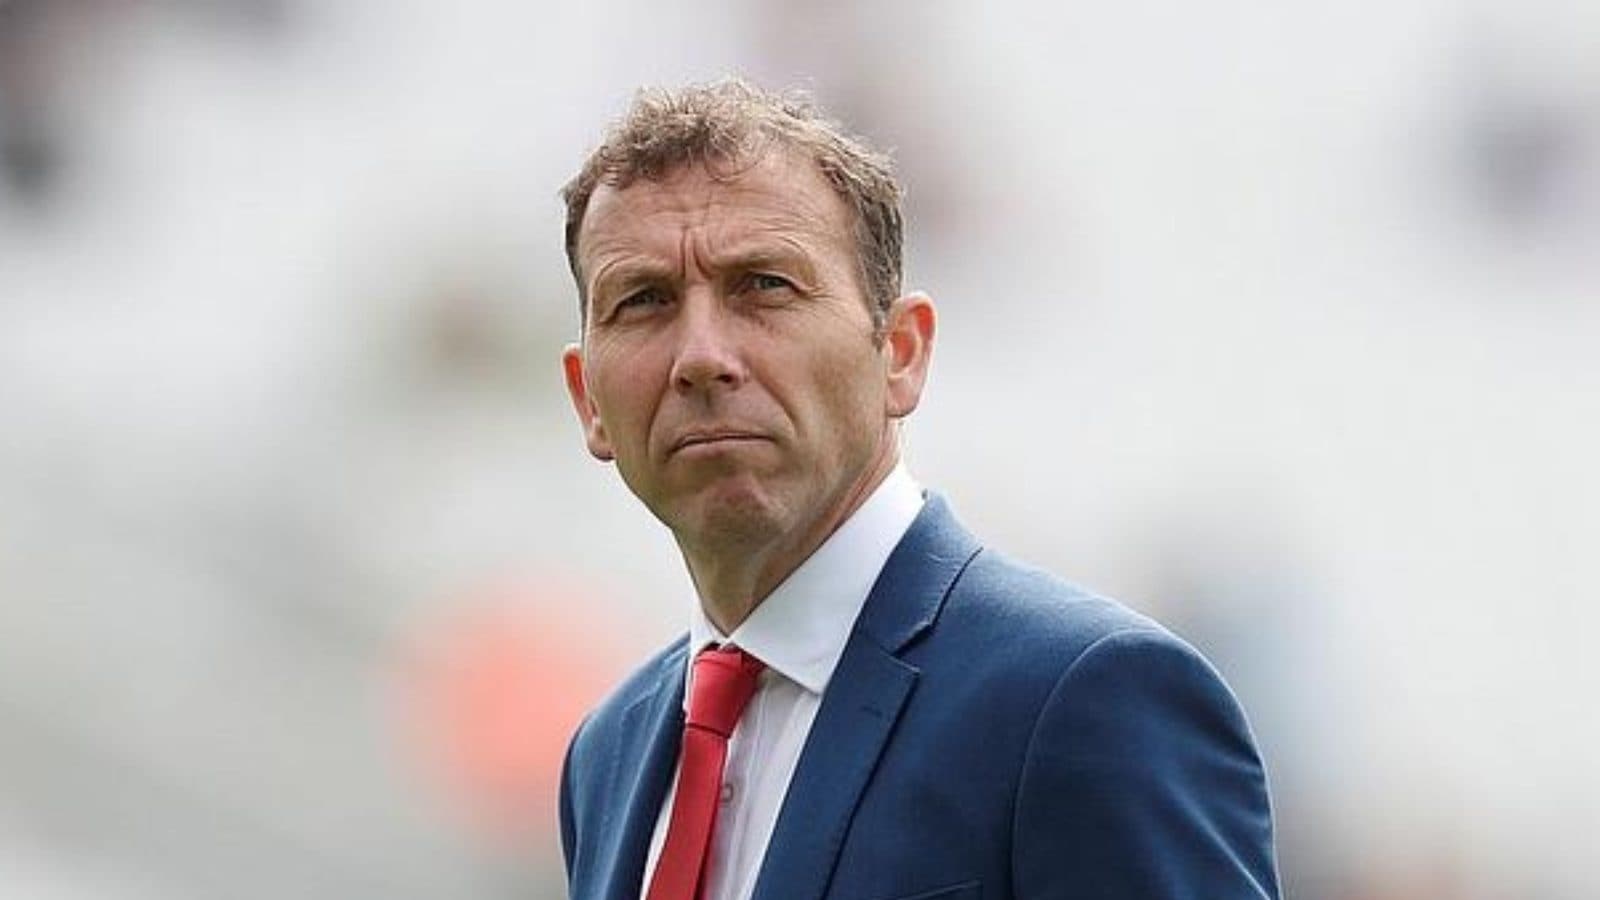 Ashes 2021: Mike Atherton says "Because of such chances, the day dragged on"